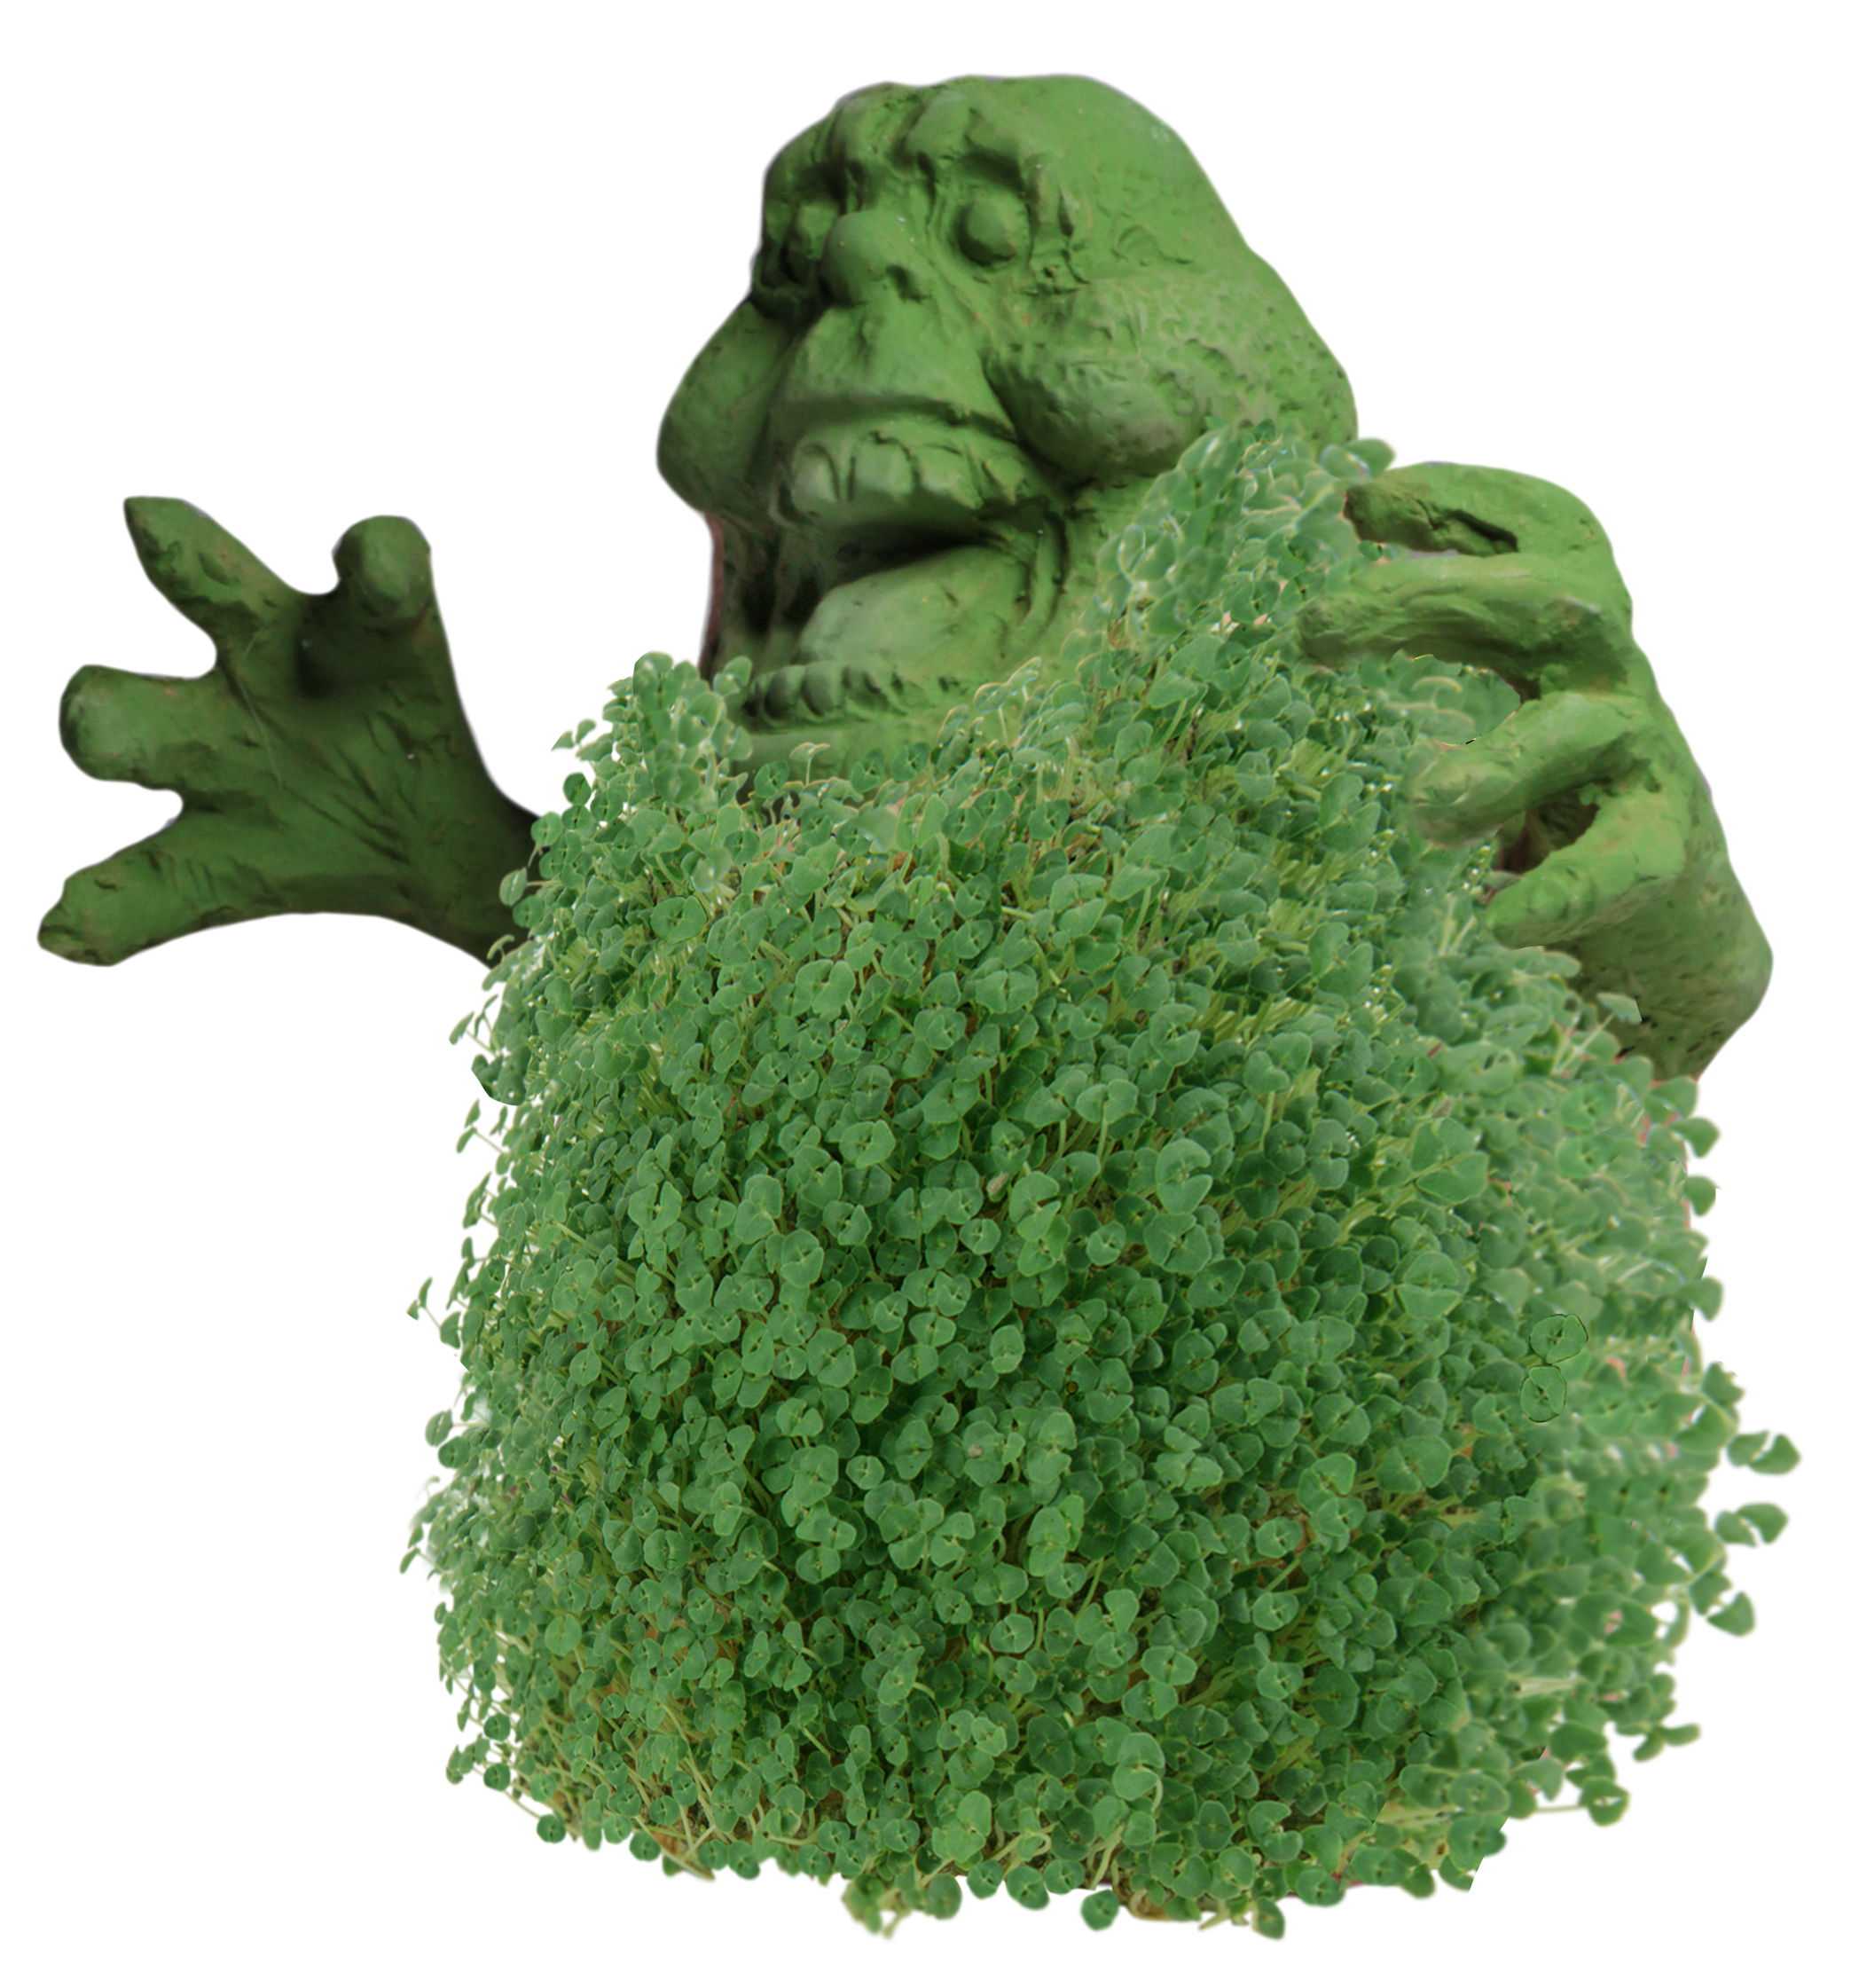 Chia Pet Slimer (Ghostbusters) - Decorative Pot Easy to Do Fun to Grow Chia Seeds - image 2 of 4